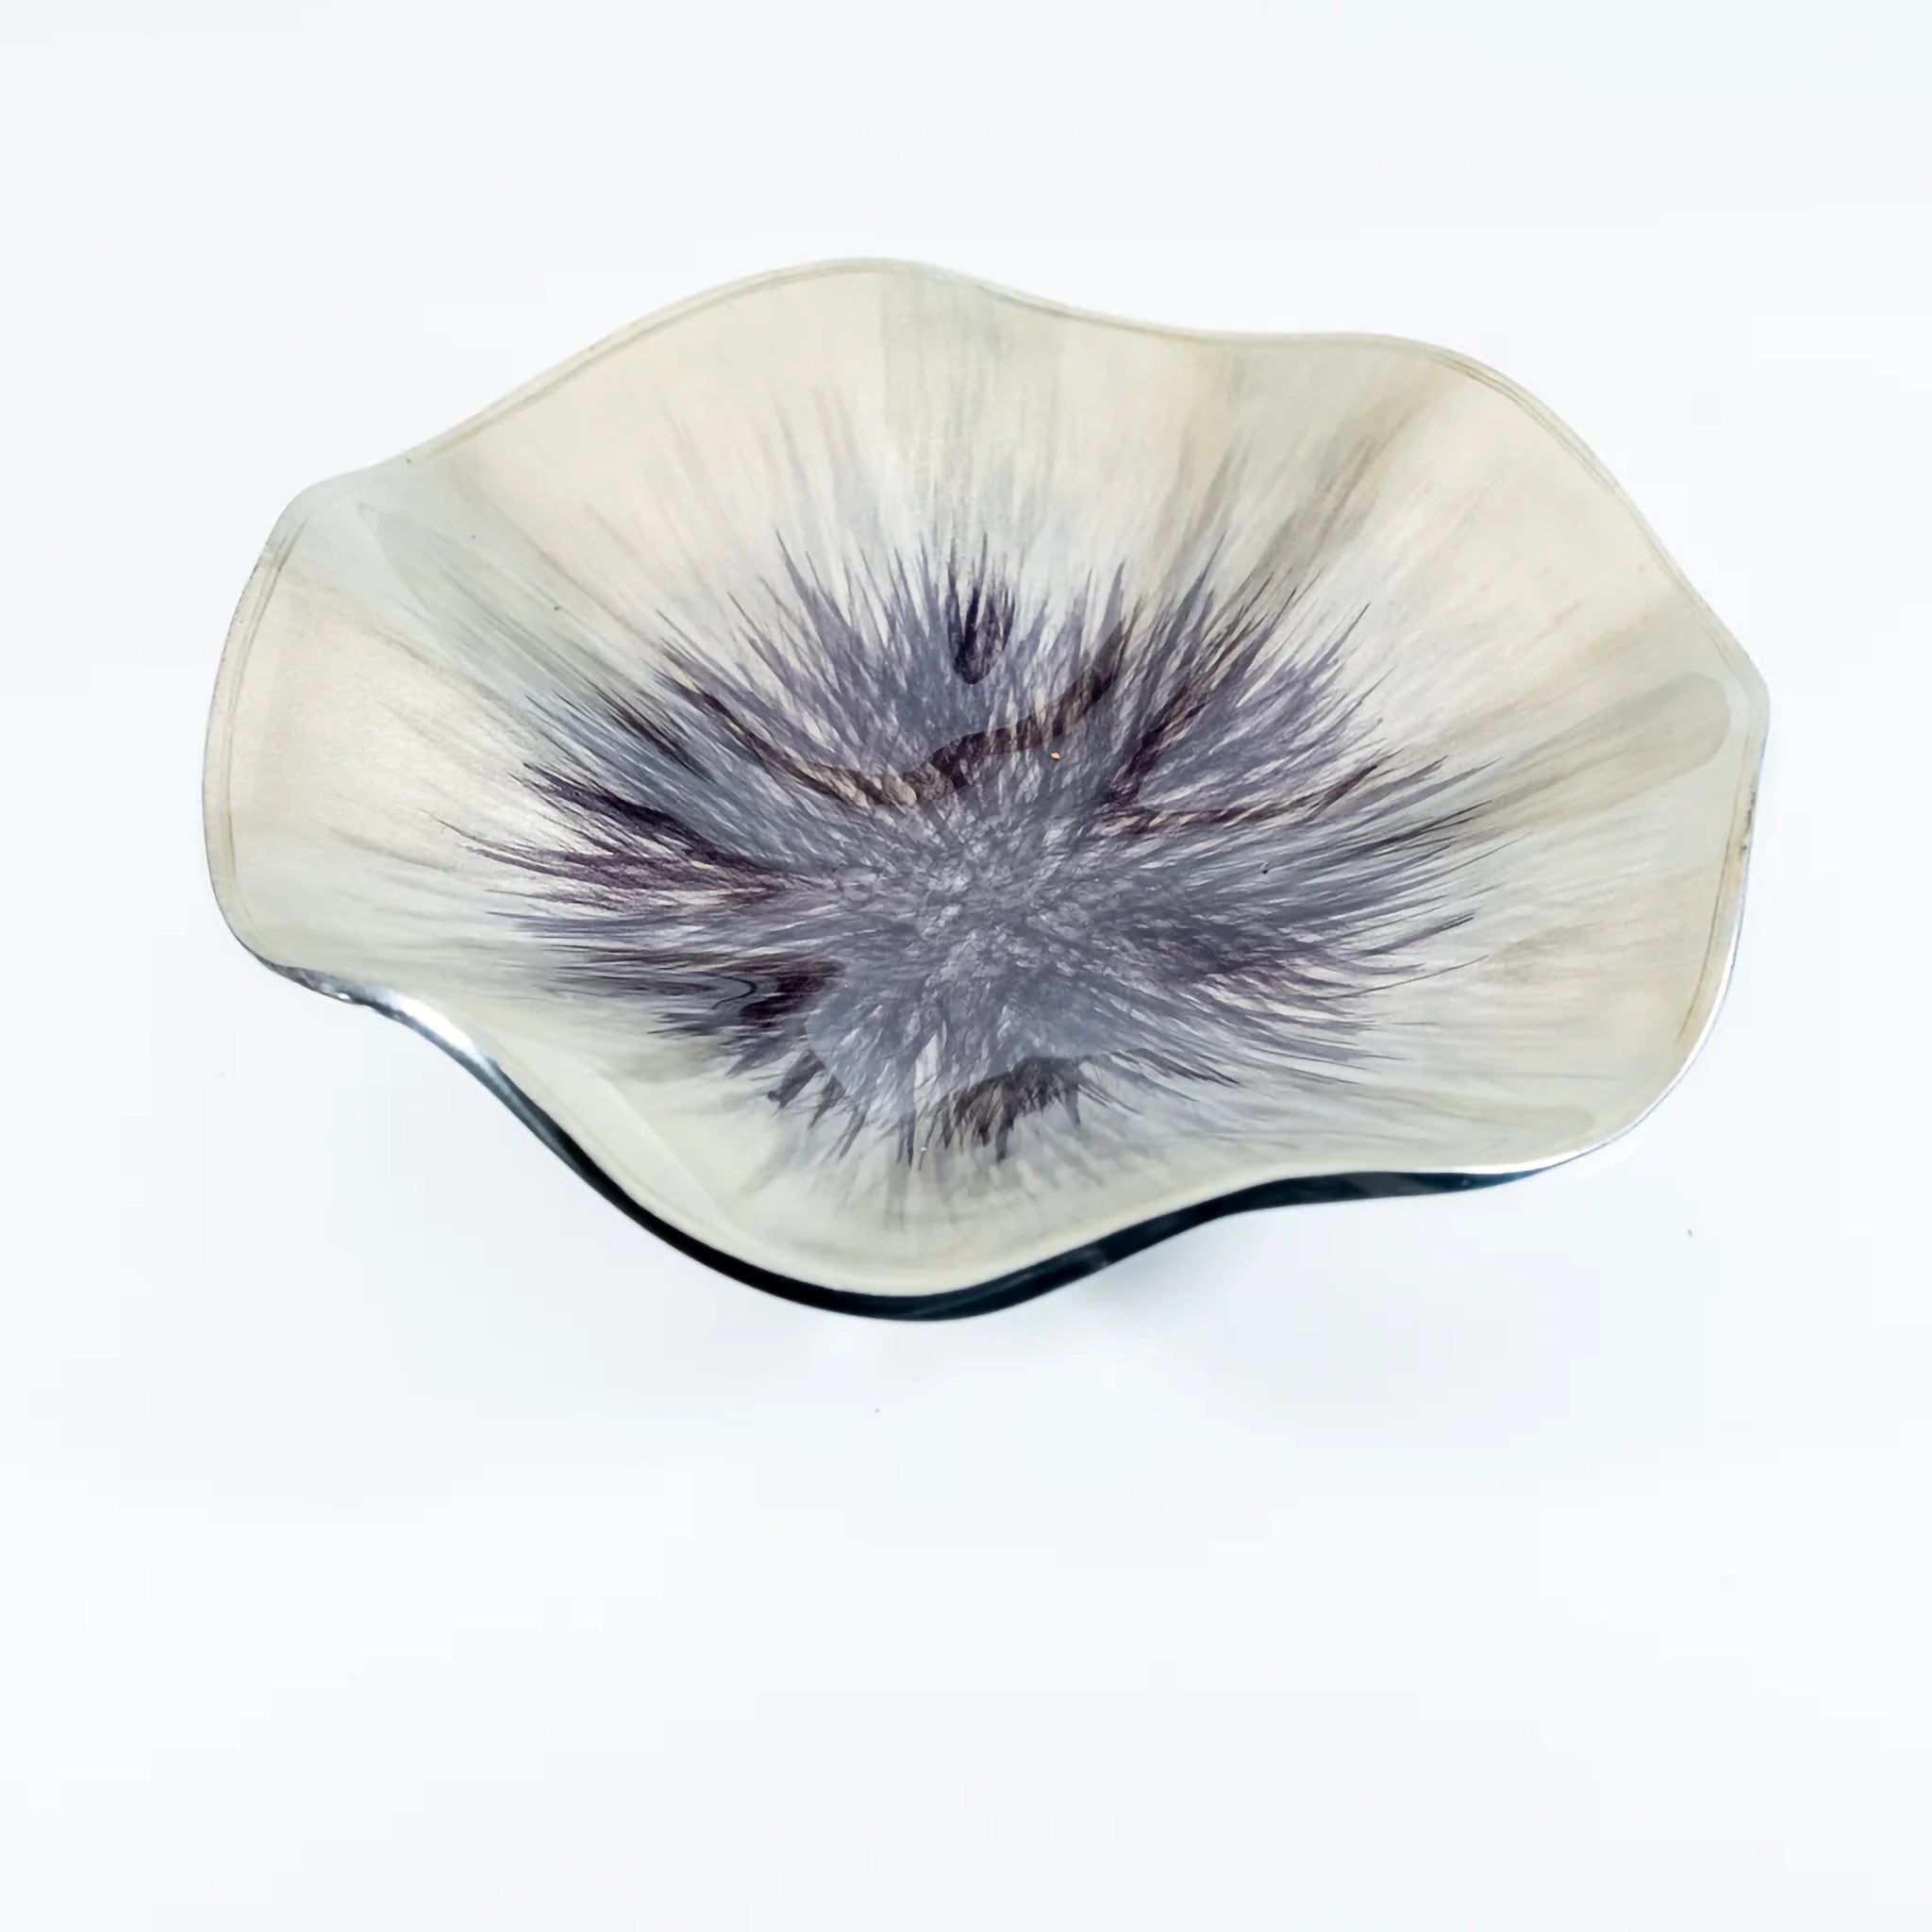 A brushed silver enamelled dish in the shape of a poppy flower